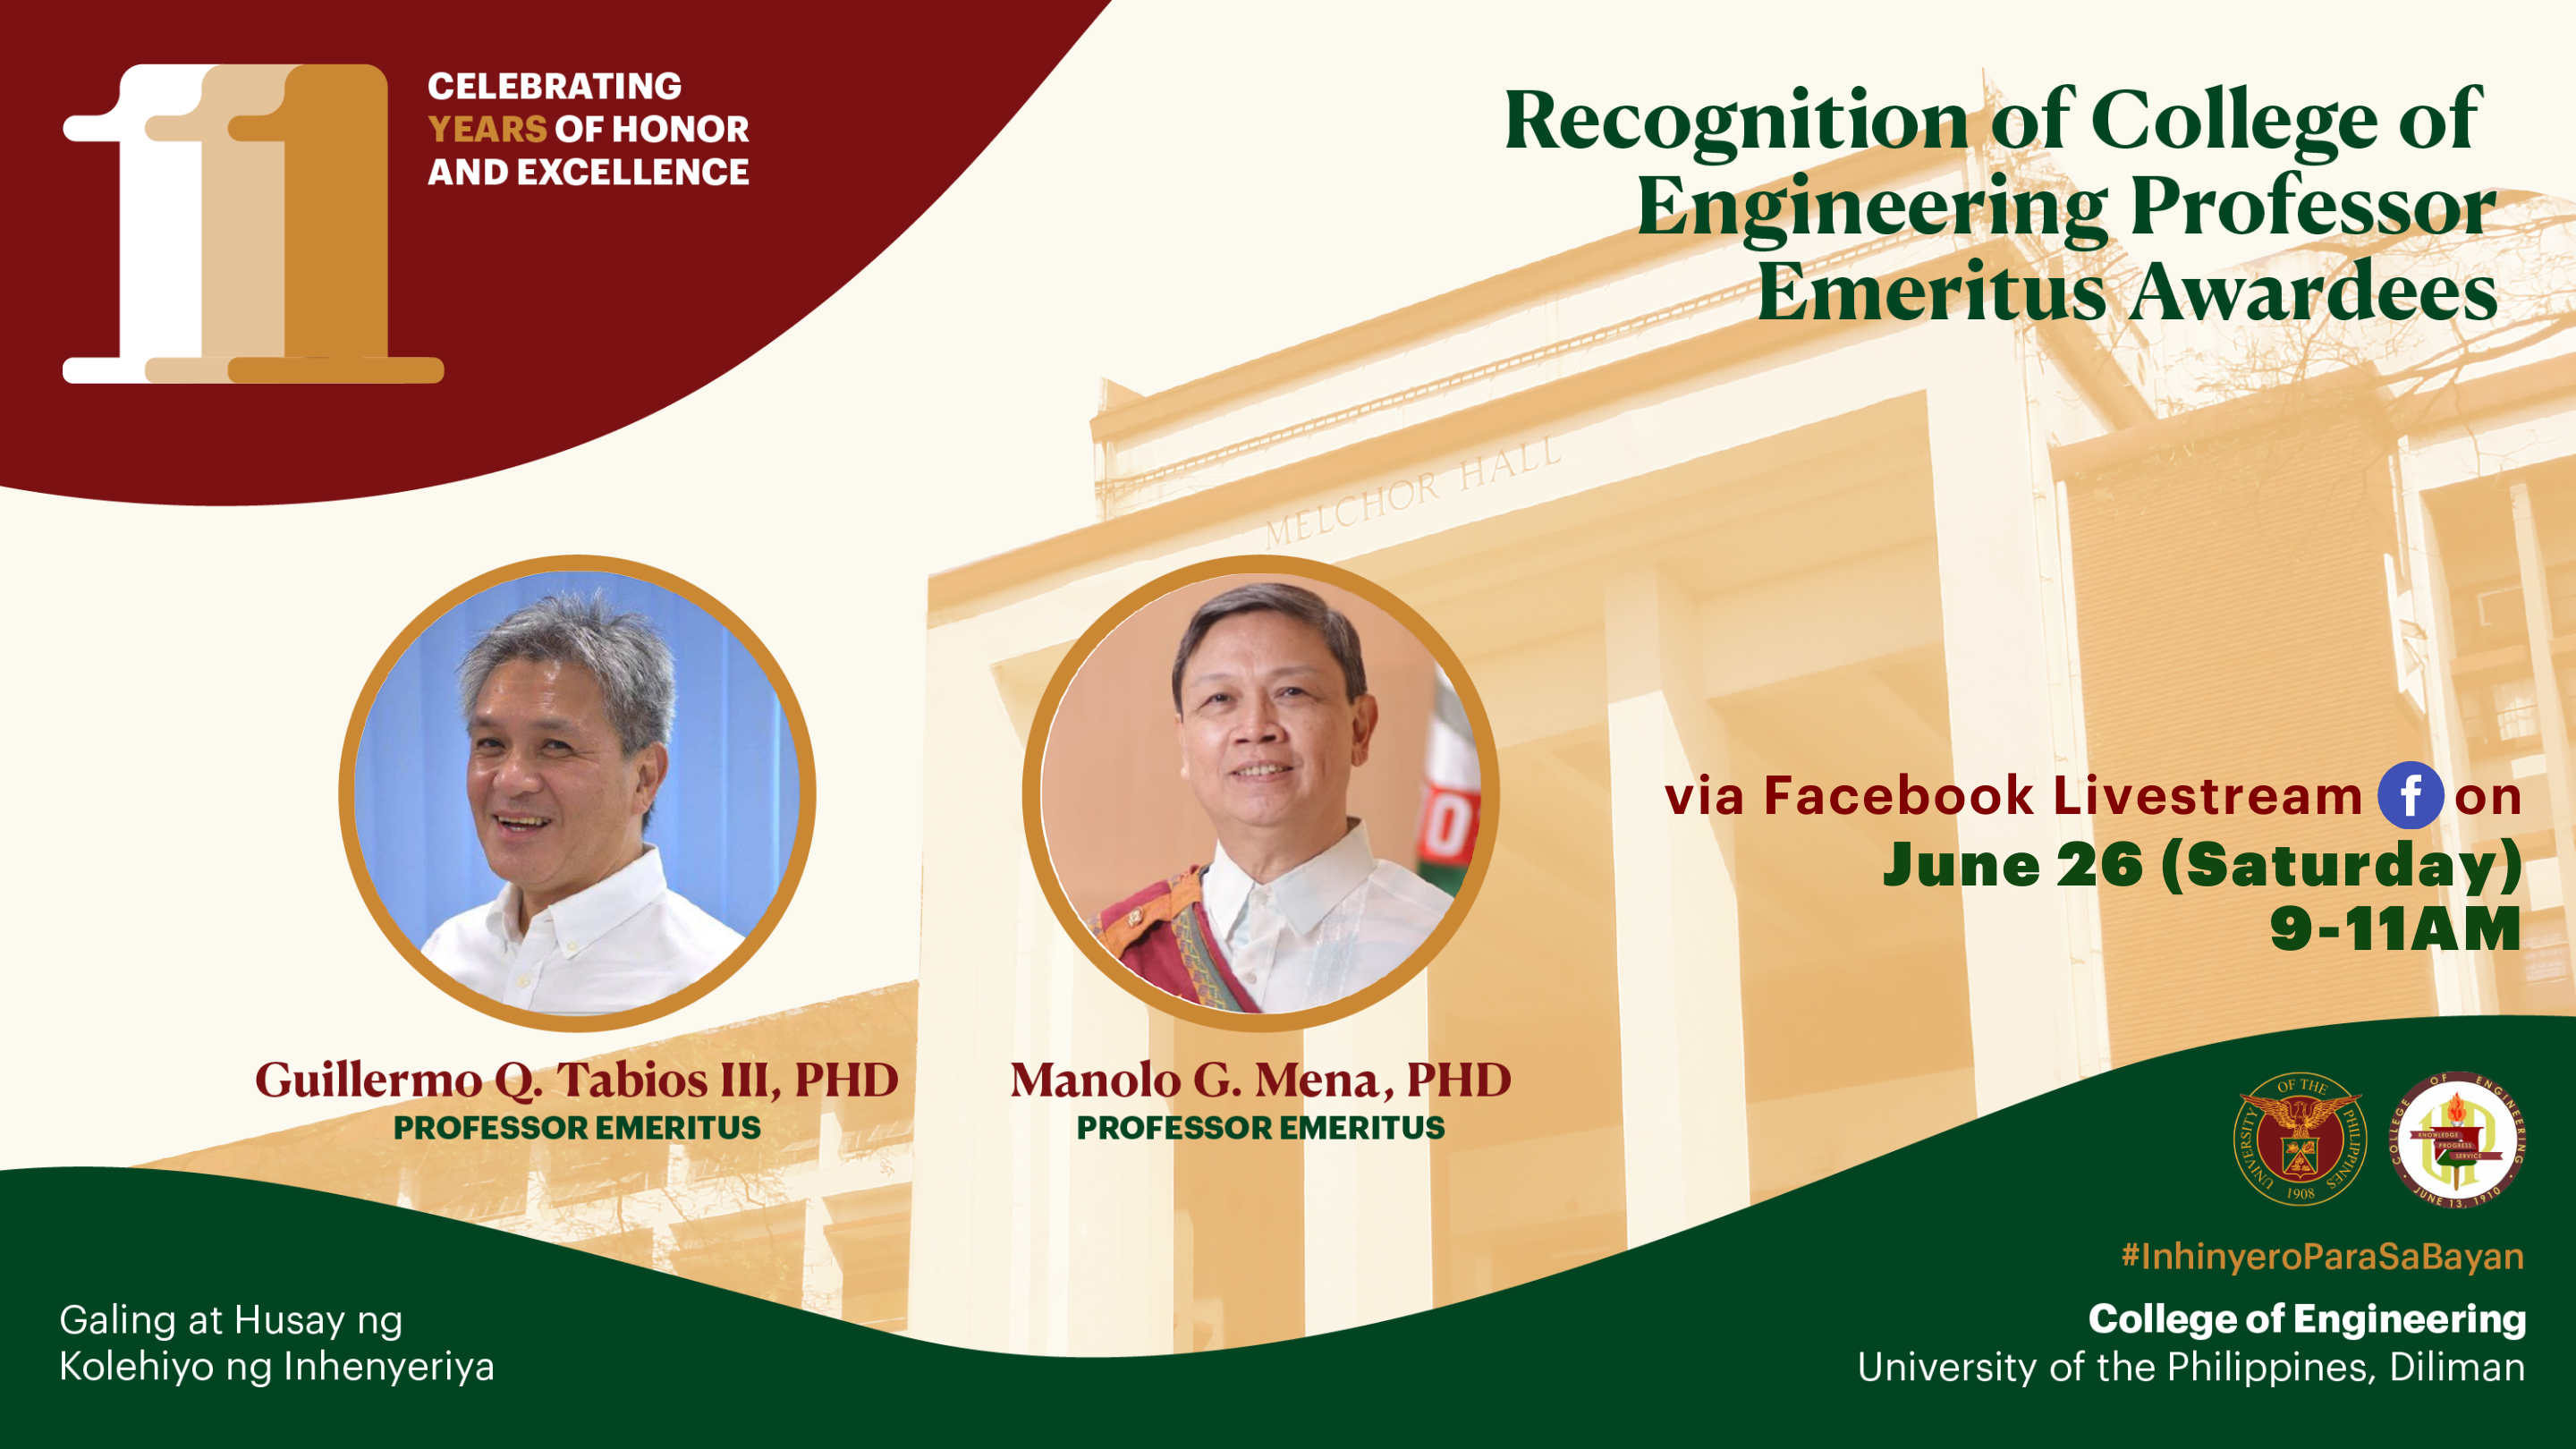 Recognition of the College of Engineering Professor Emeritus Awardees